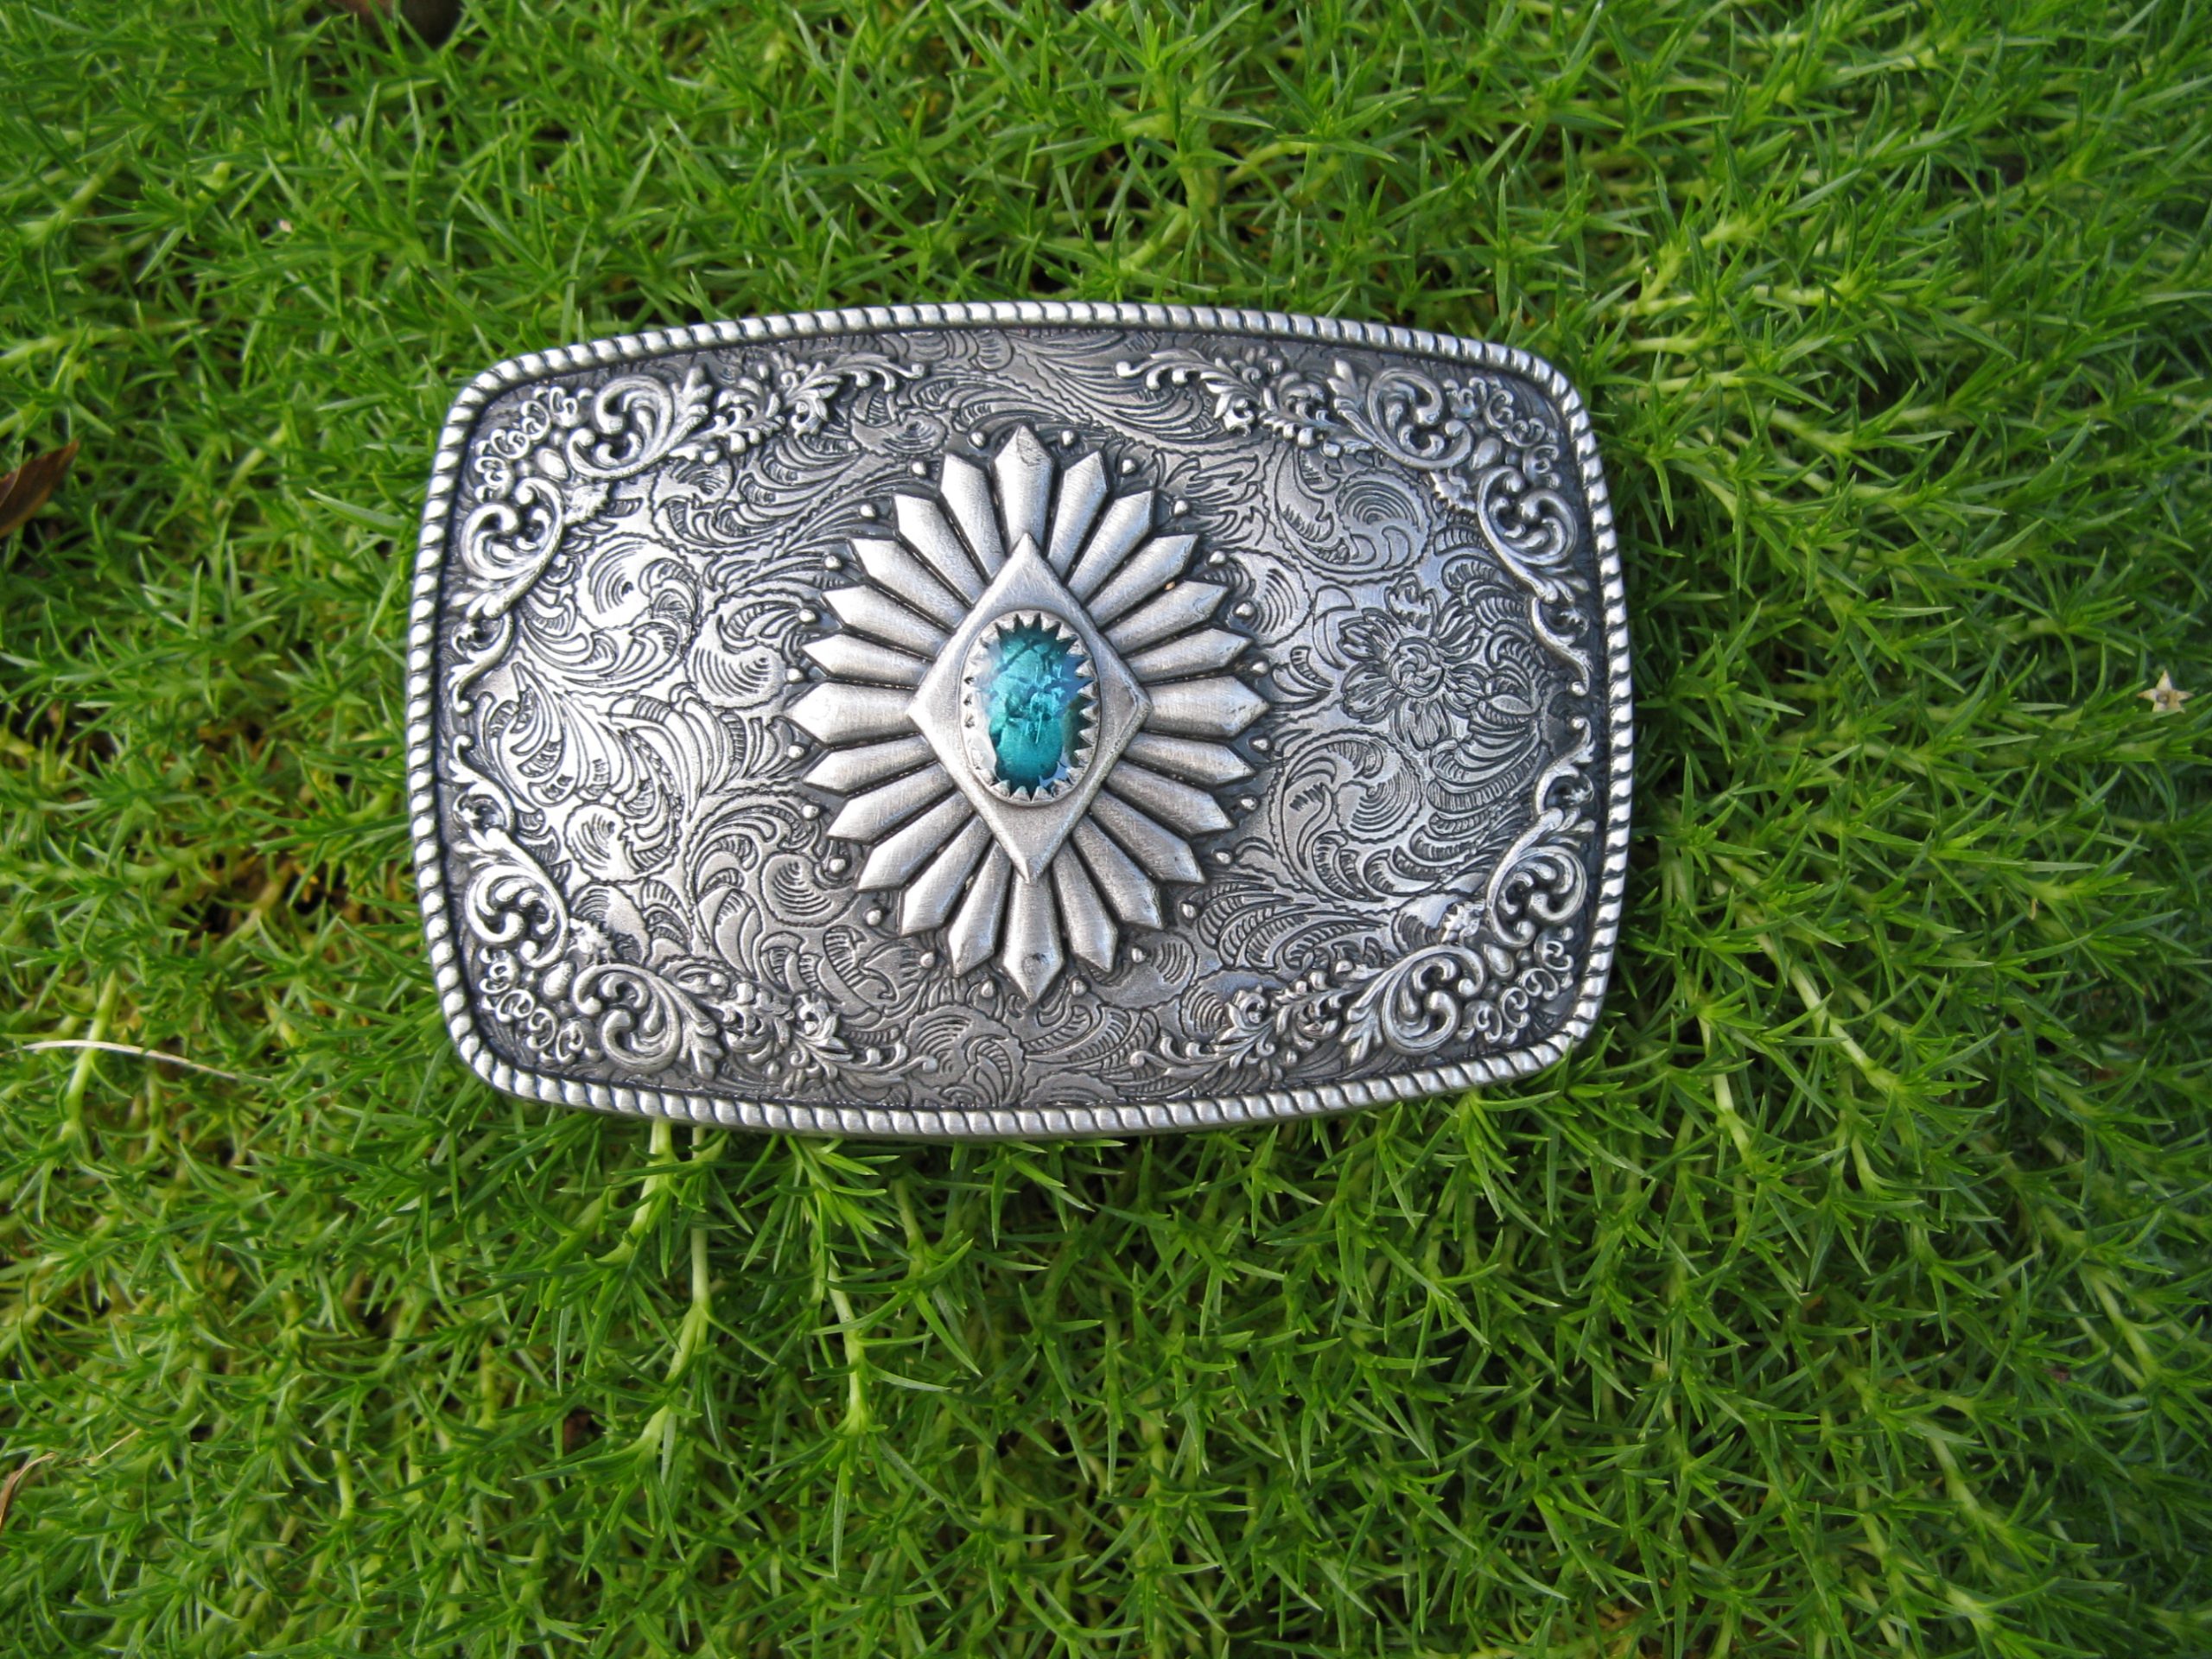 WESTERN STONE ROPE EDGE SILVER PLATED BELT BUCKLE